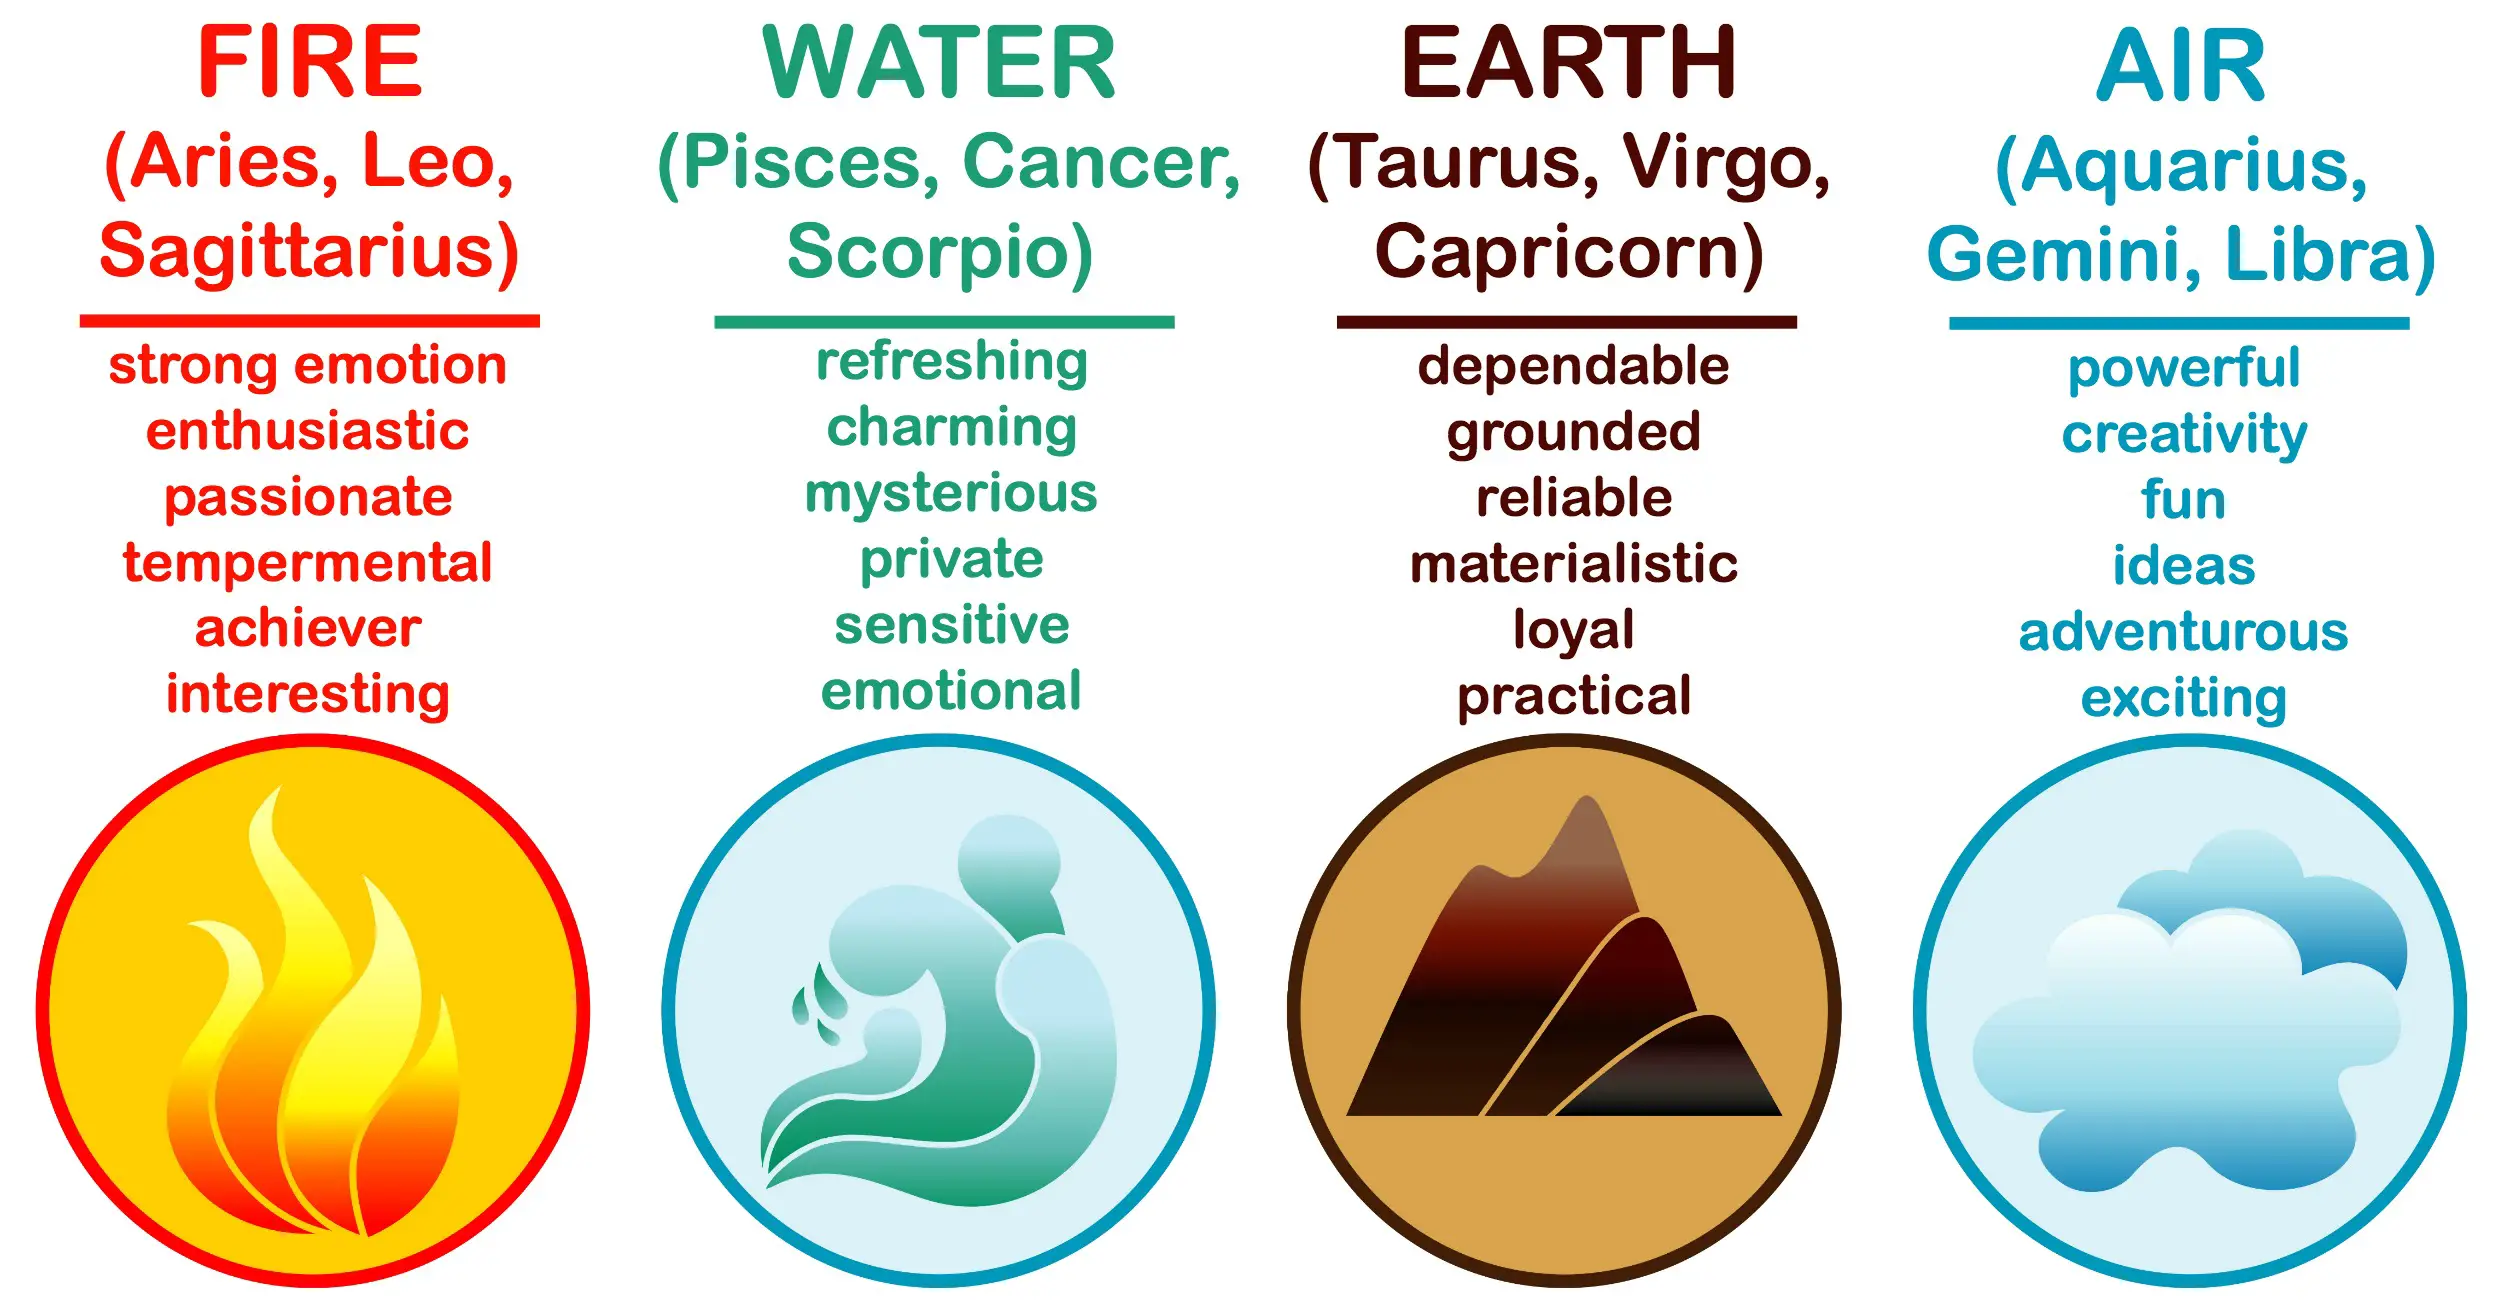 What Kind of Element Are You? Fire, Water, Earth or Air?